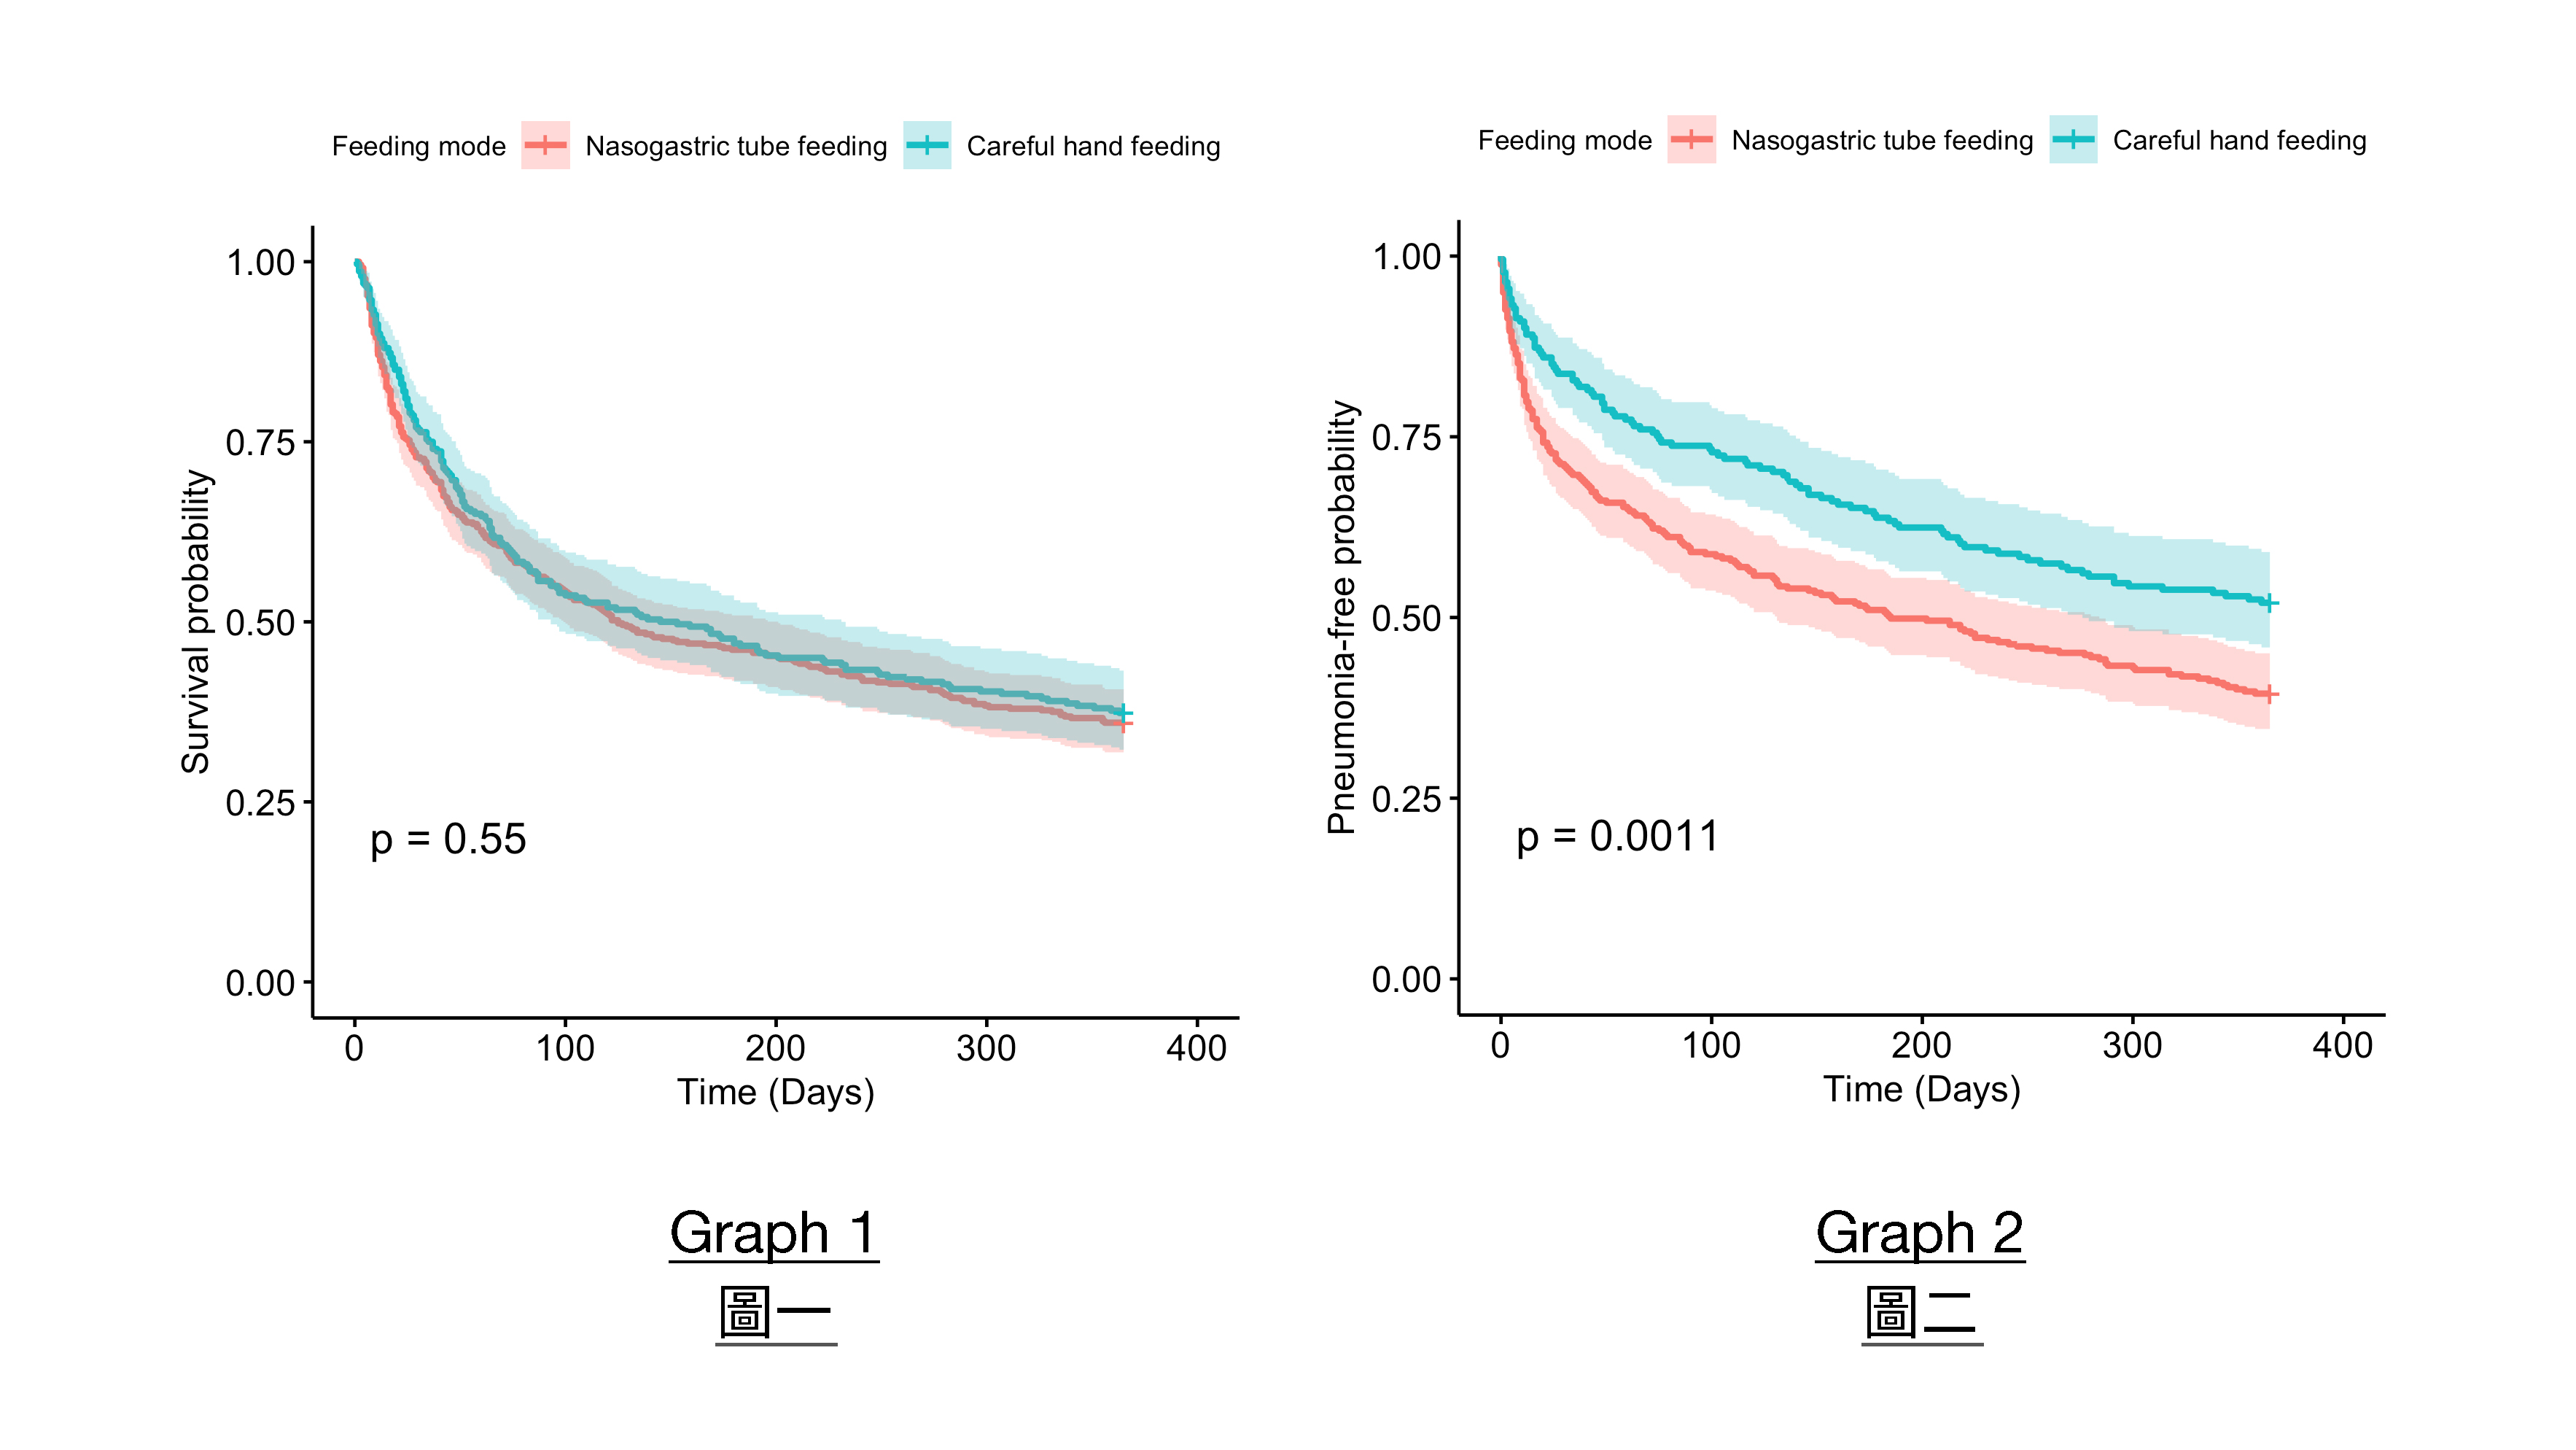 There is little difference in one-year survival probability among advanced dementia patients on nasogastric tube feeding or careful hand feeding (125 days versus 145 days, Graph 1). But those on nasogastric tube feeding have a lower pneumonia-free survival probability compared with those on careful hand feeding (Graph 2).